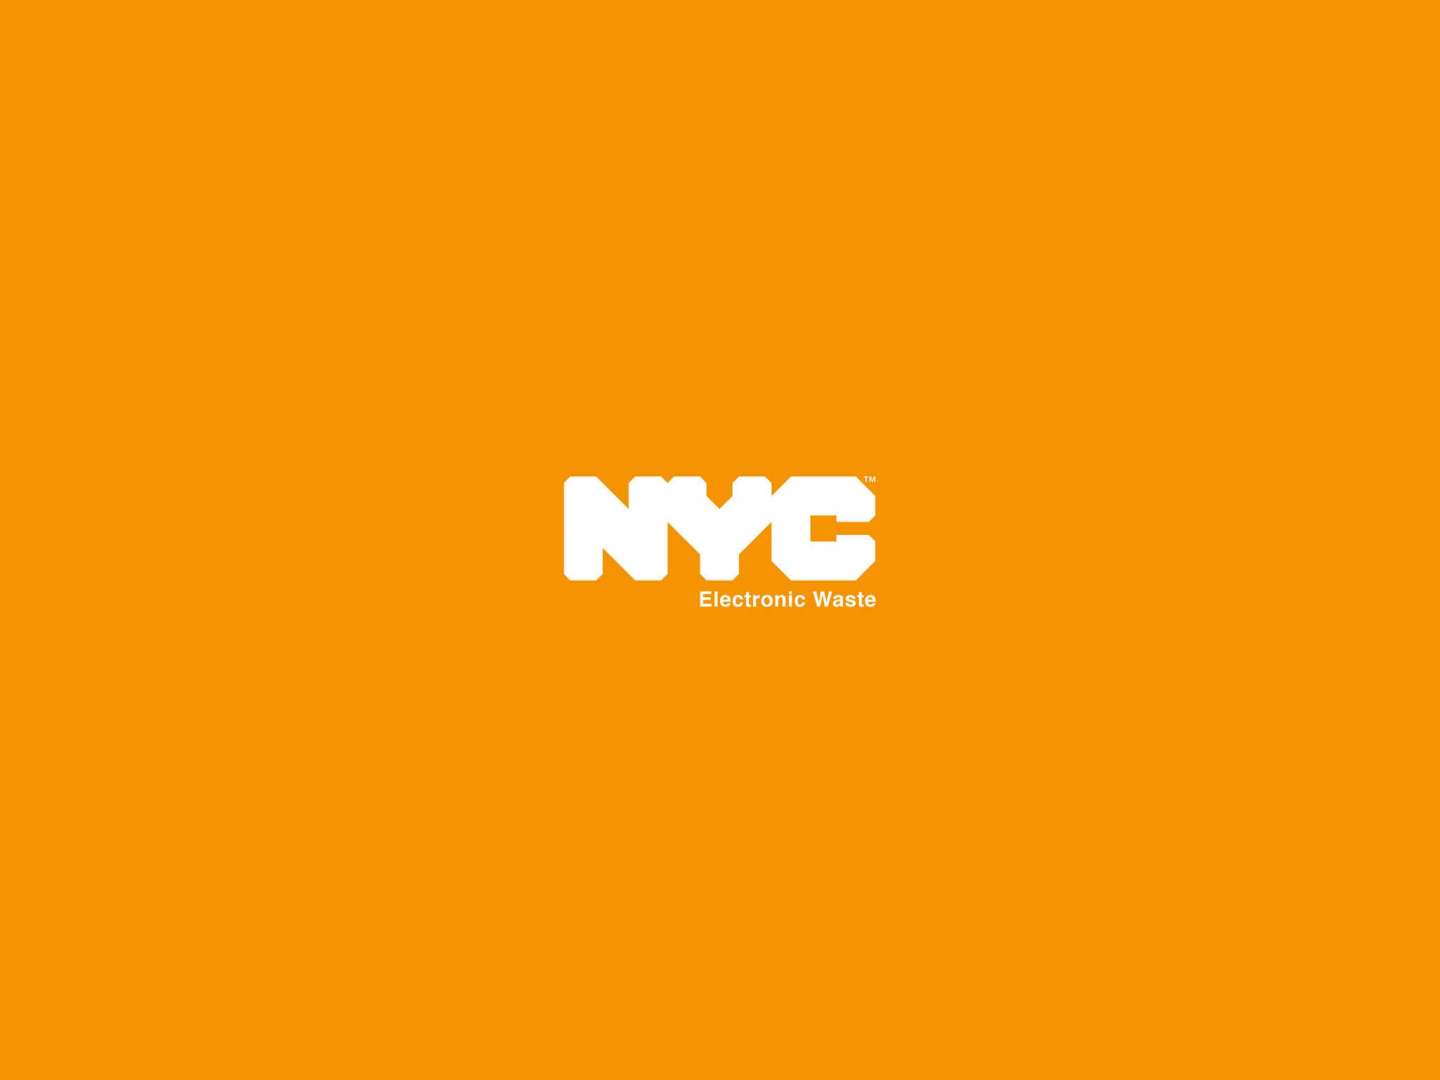 NYC Services: E-Waste